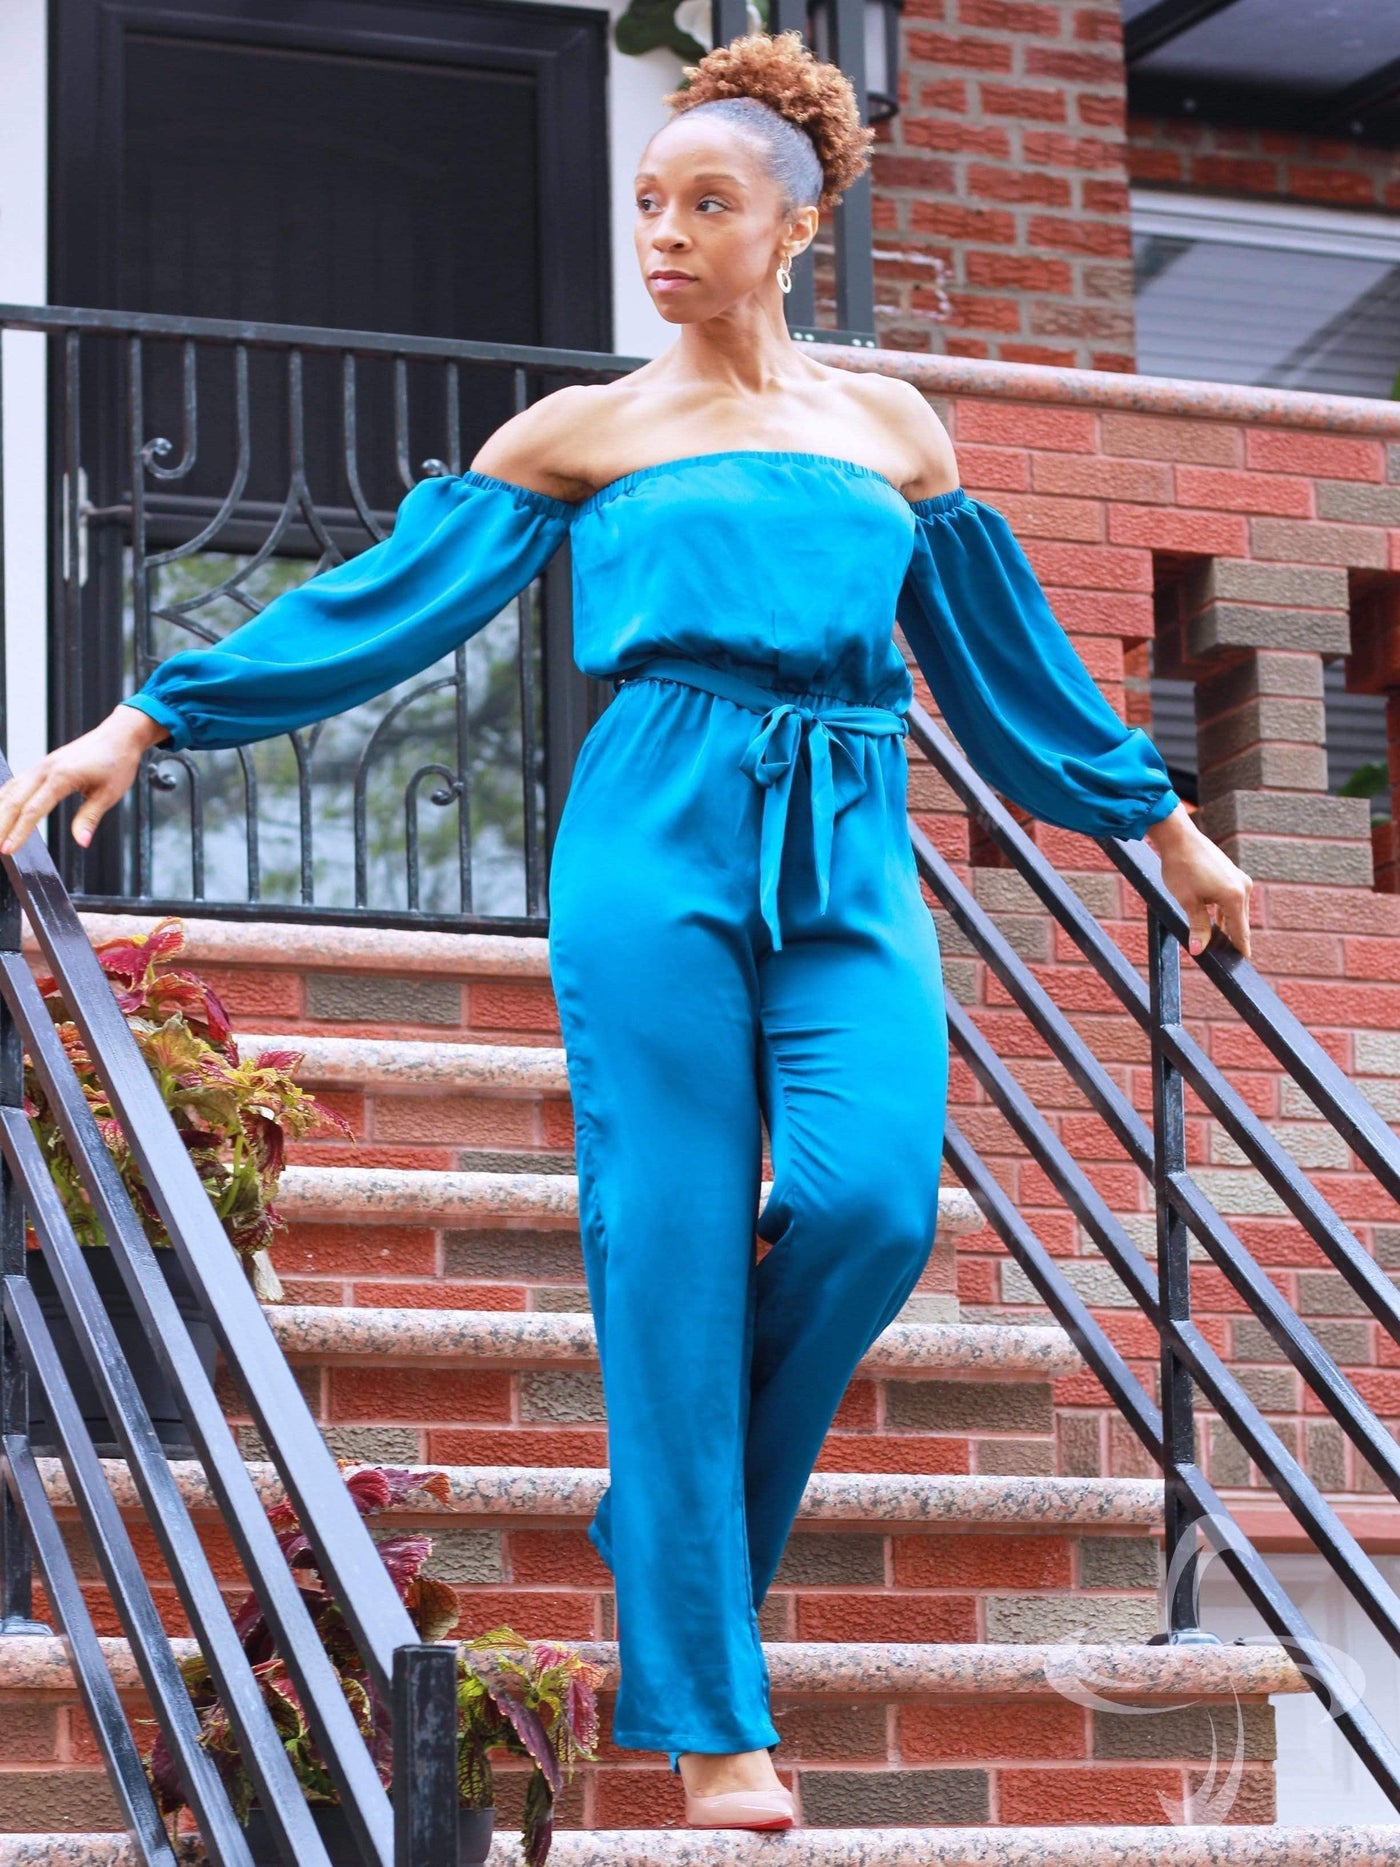 Teal Love | Wide-Leg Jumpsuit - Statement Piece NY _tab_size-chart, Blossom 2021, Blue, Brooklyn Boutique, chic, Dresses, Fall, Fall Fashion, final sale, Jumpsuit, Jumpsuits, light dress, Long Sleeve, Misses, off the shoulder, one piece, pantsuit, Sale, satin, Standard Fall, Statement Clothing, statement jumpsuit, Statement Piece Boutique, statement piece ny, Statement Pieces, Statement Pieces Boutique, teal jumpsuit, teal love, wide-leg jumpsuit, Women's Boutique Statement Dresses/Jumpsuits